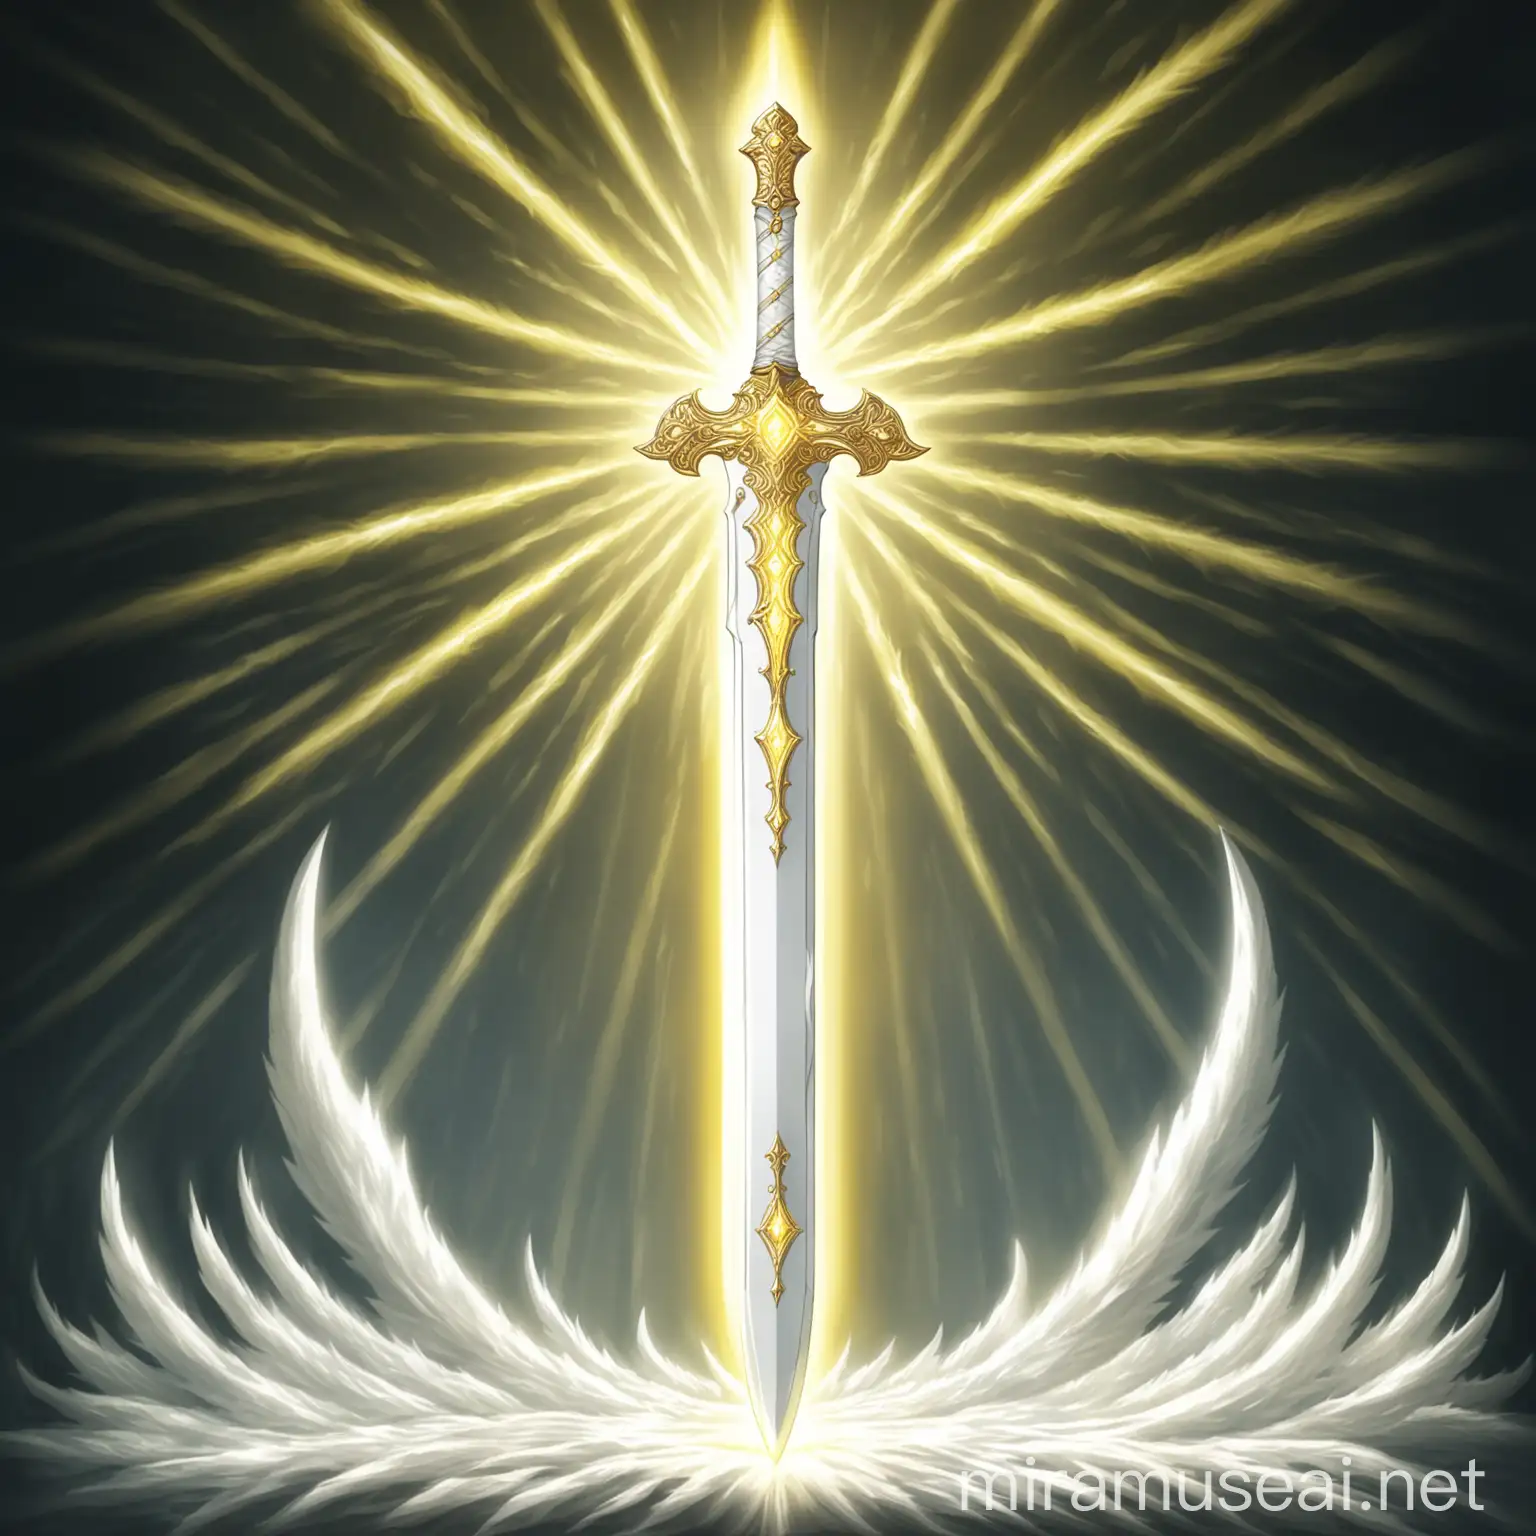 Divine Radiance Fantasy Sword with Yellow and White Glow